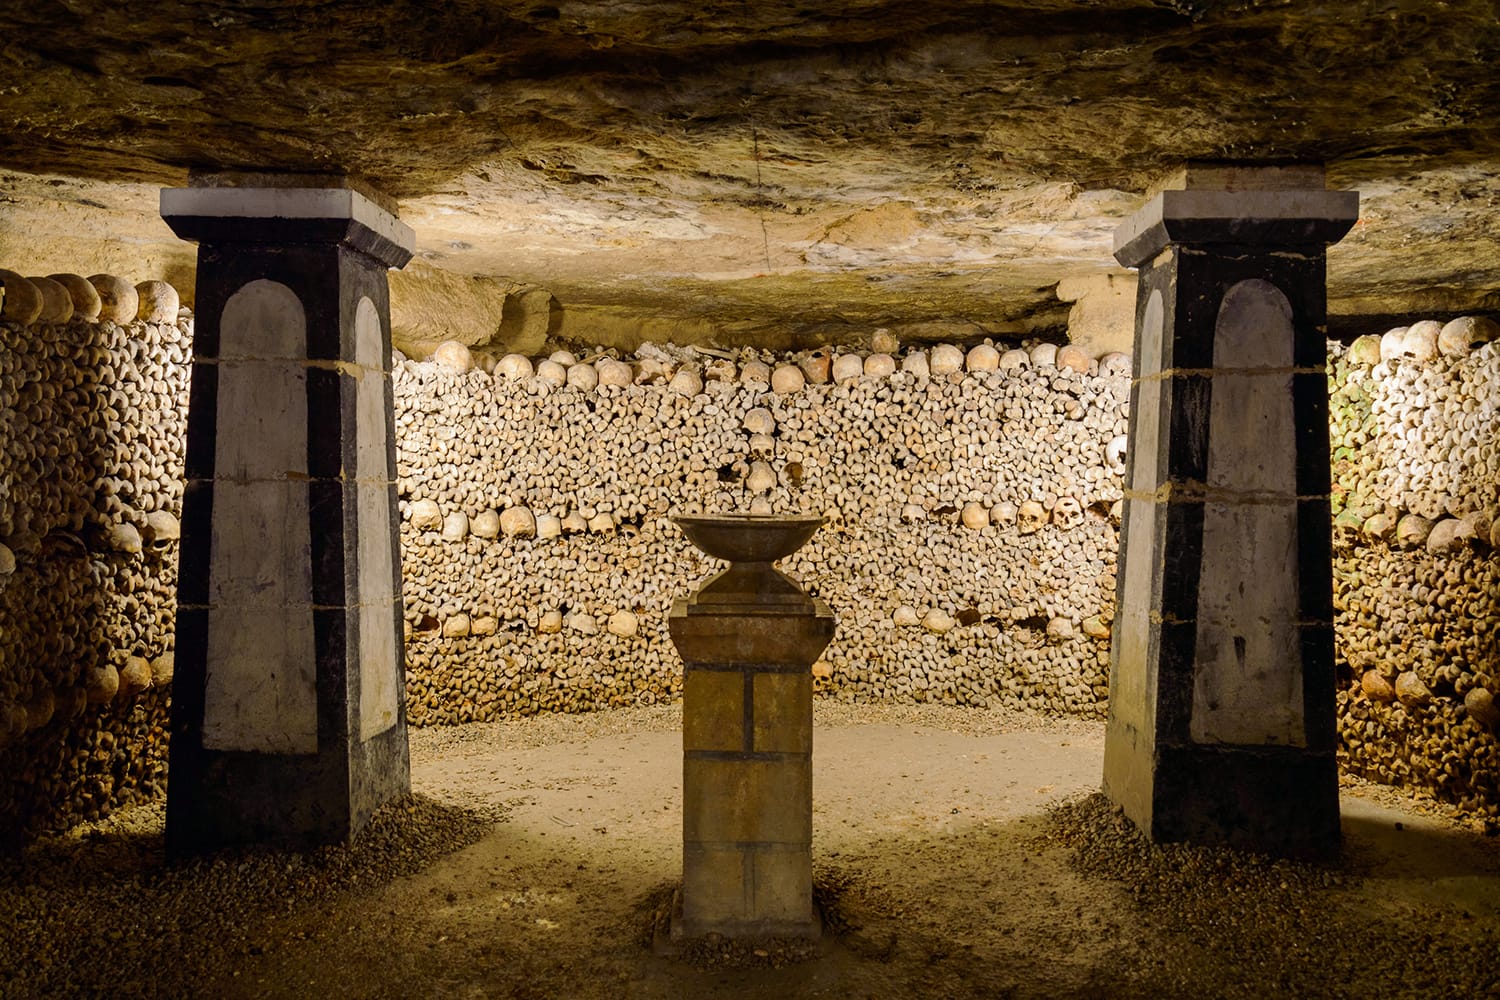 Catacombs in Paris, France